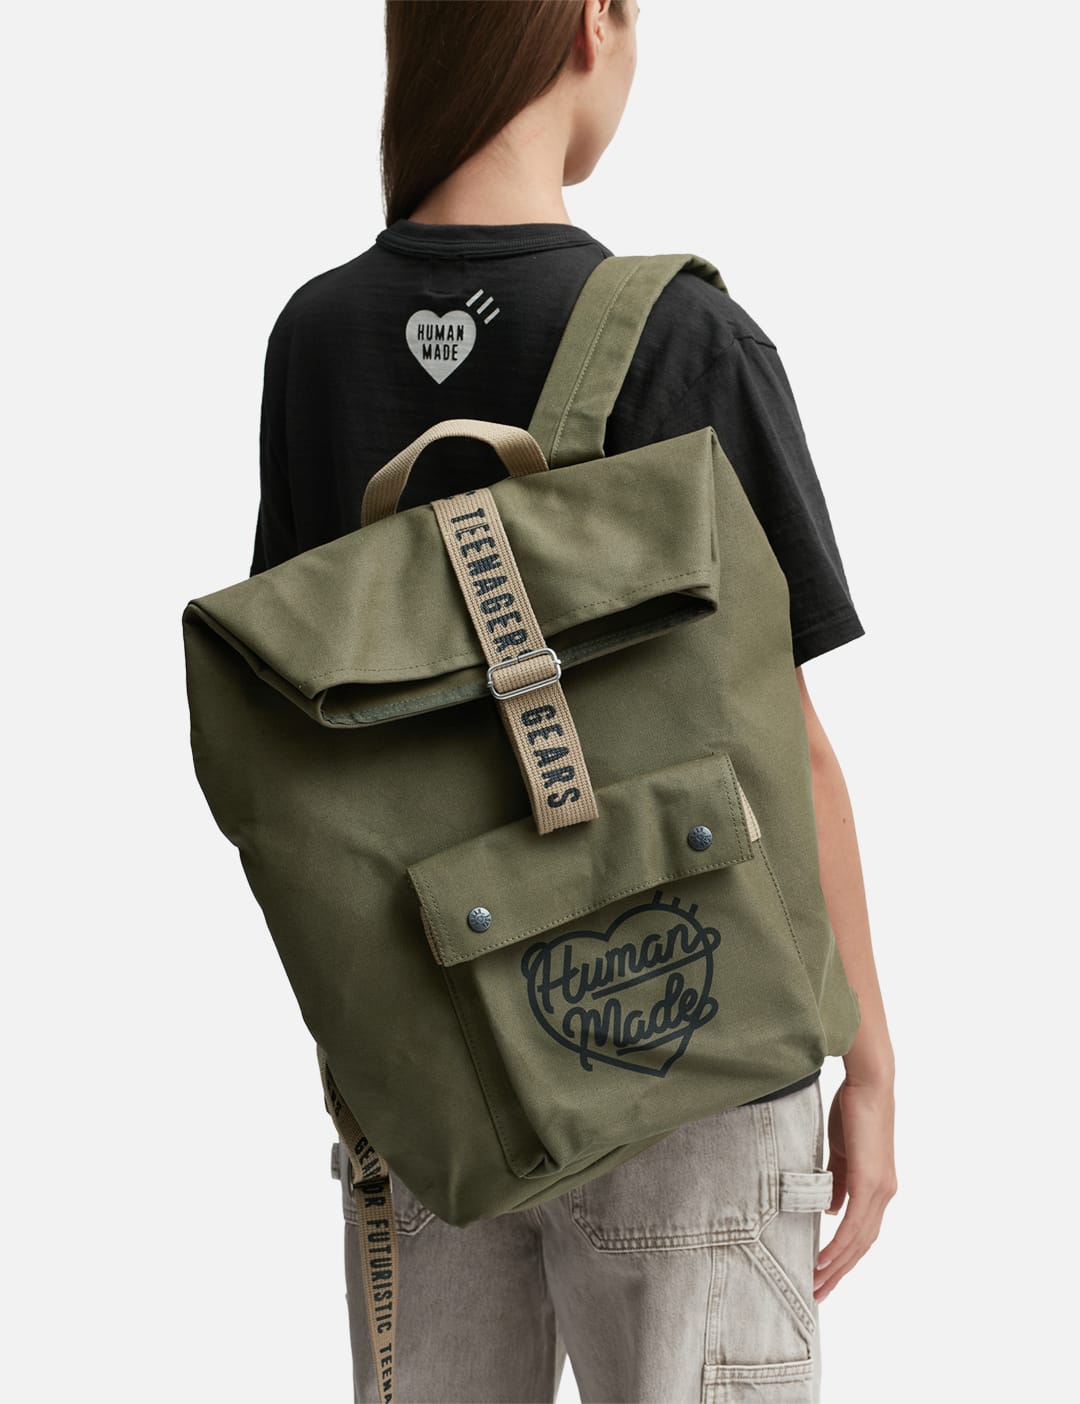 Human Made - Hunting Bag | HBX - Globally Curated Fashion and ...